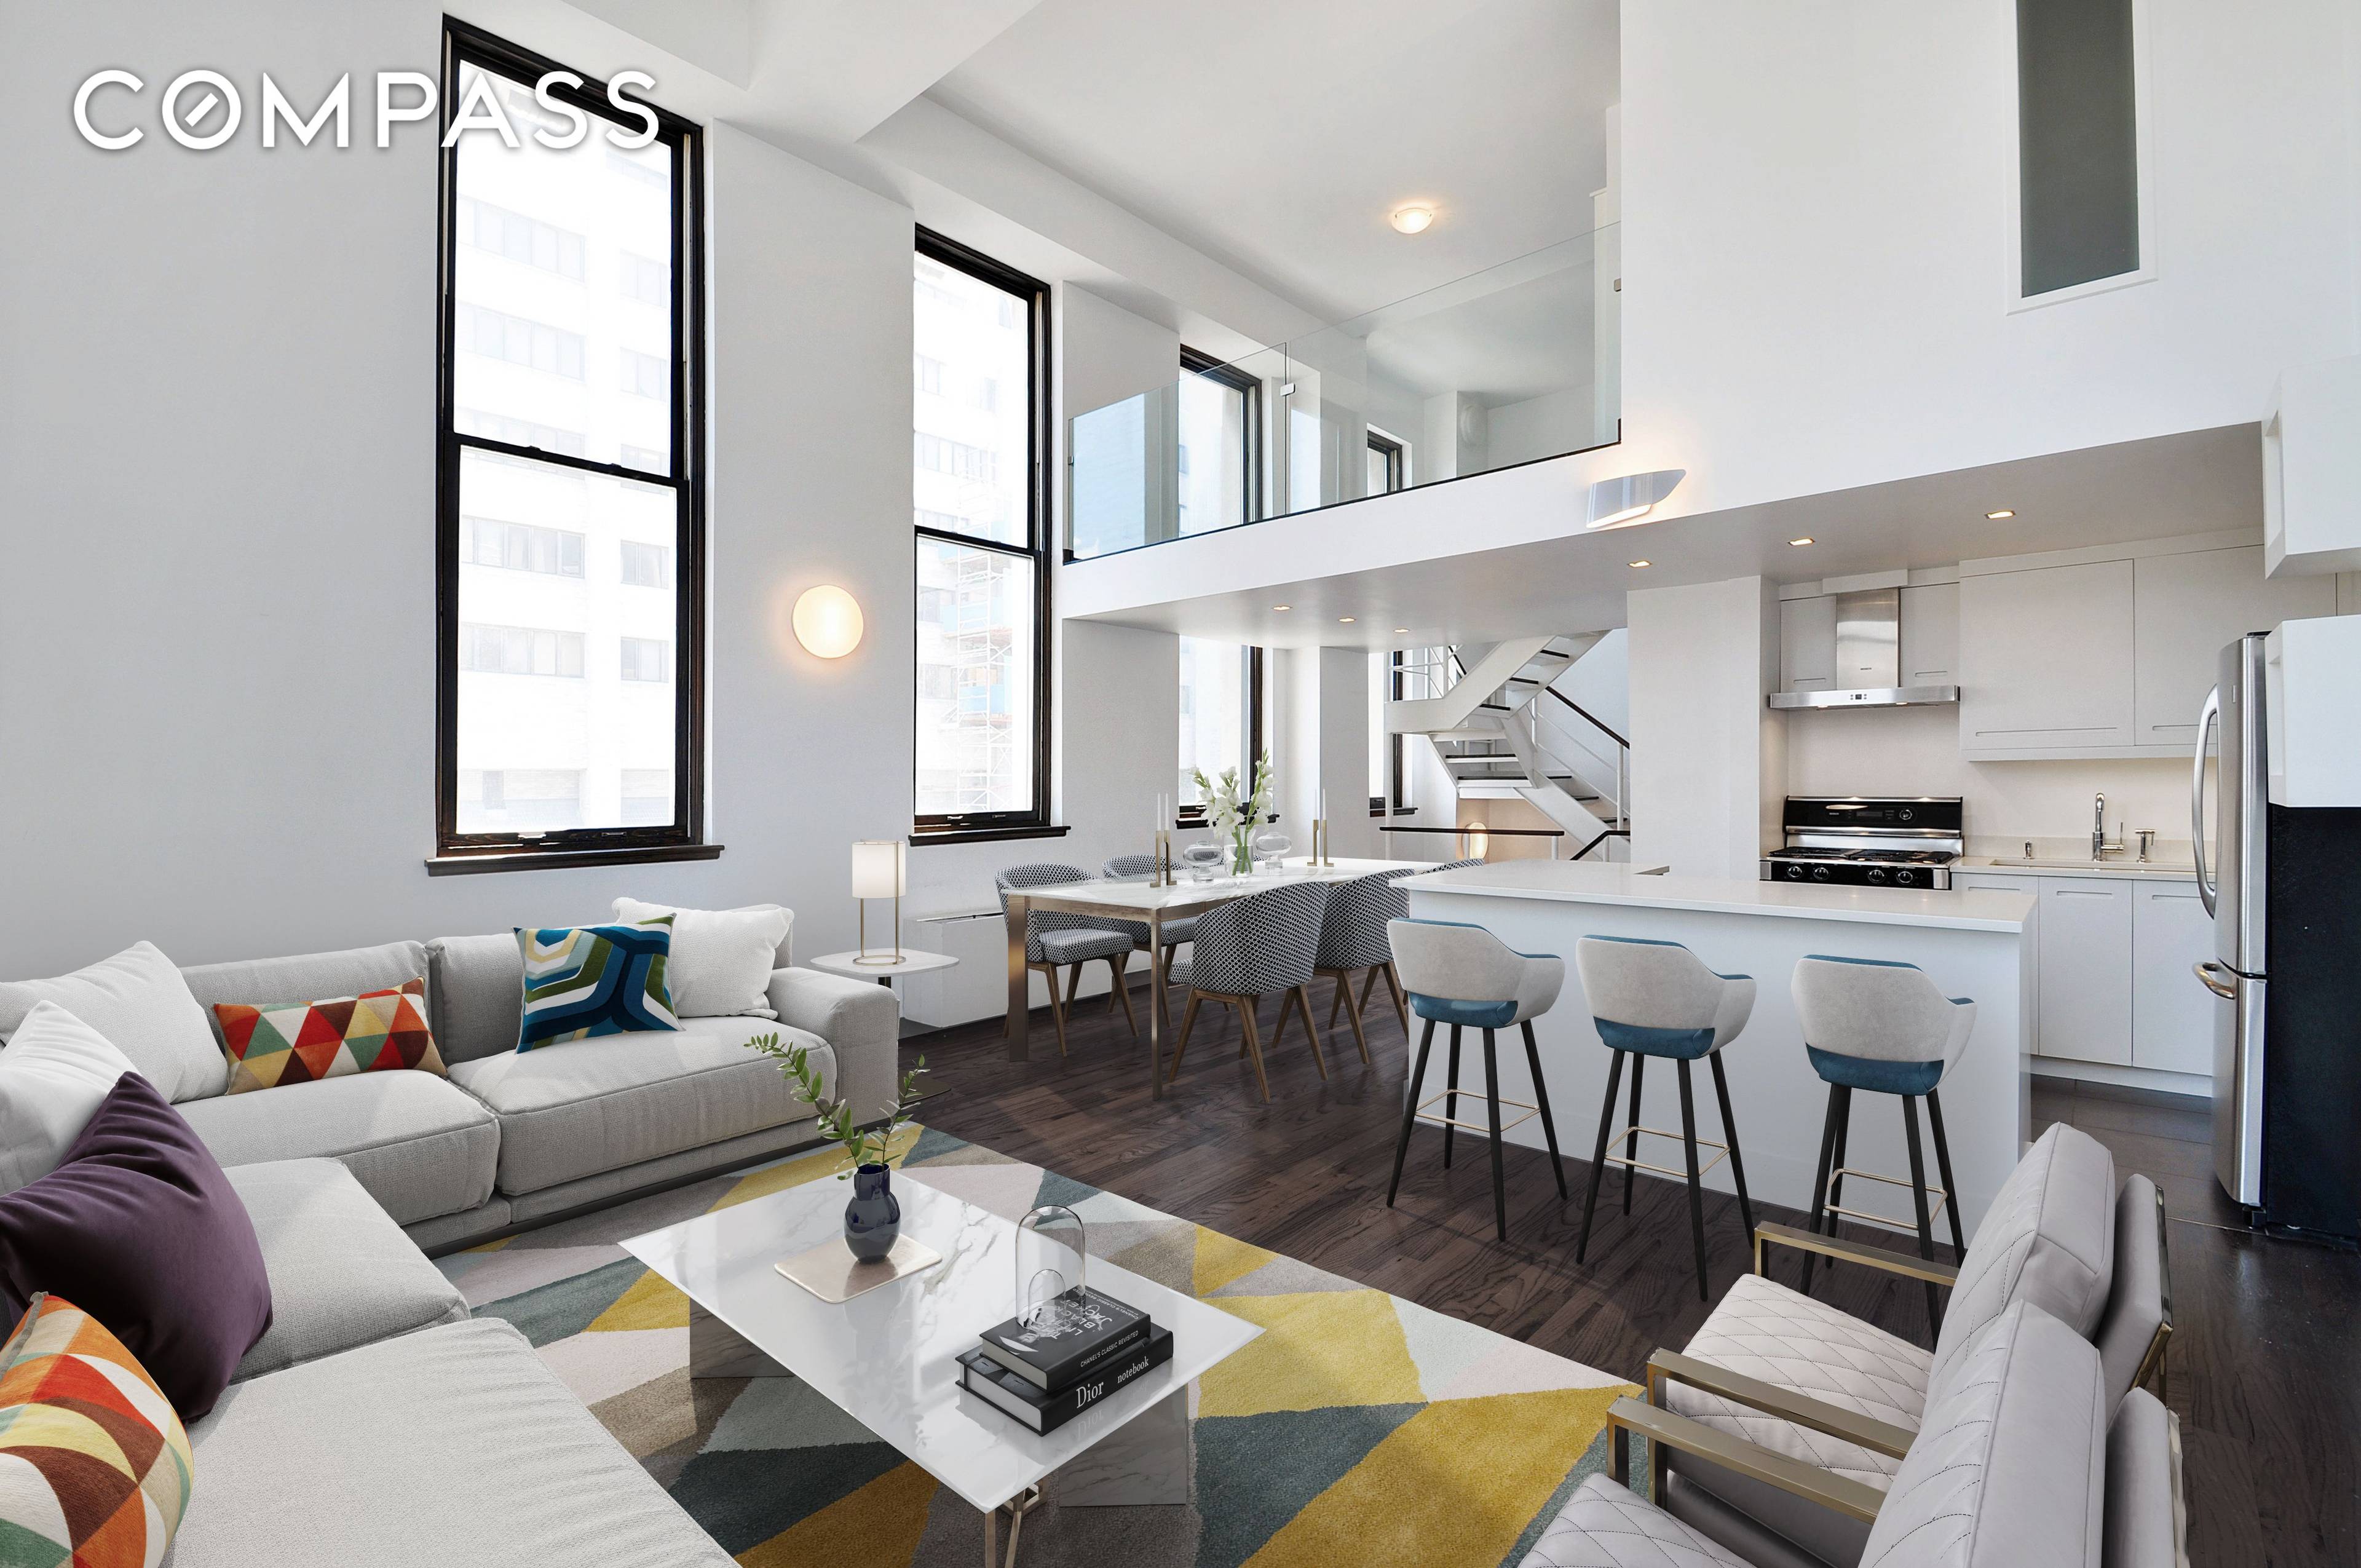 Available immediately. Dramatic Gramercy triplex corner loft with spectacular natural light and designer finish.